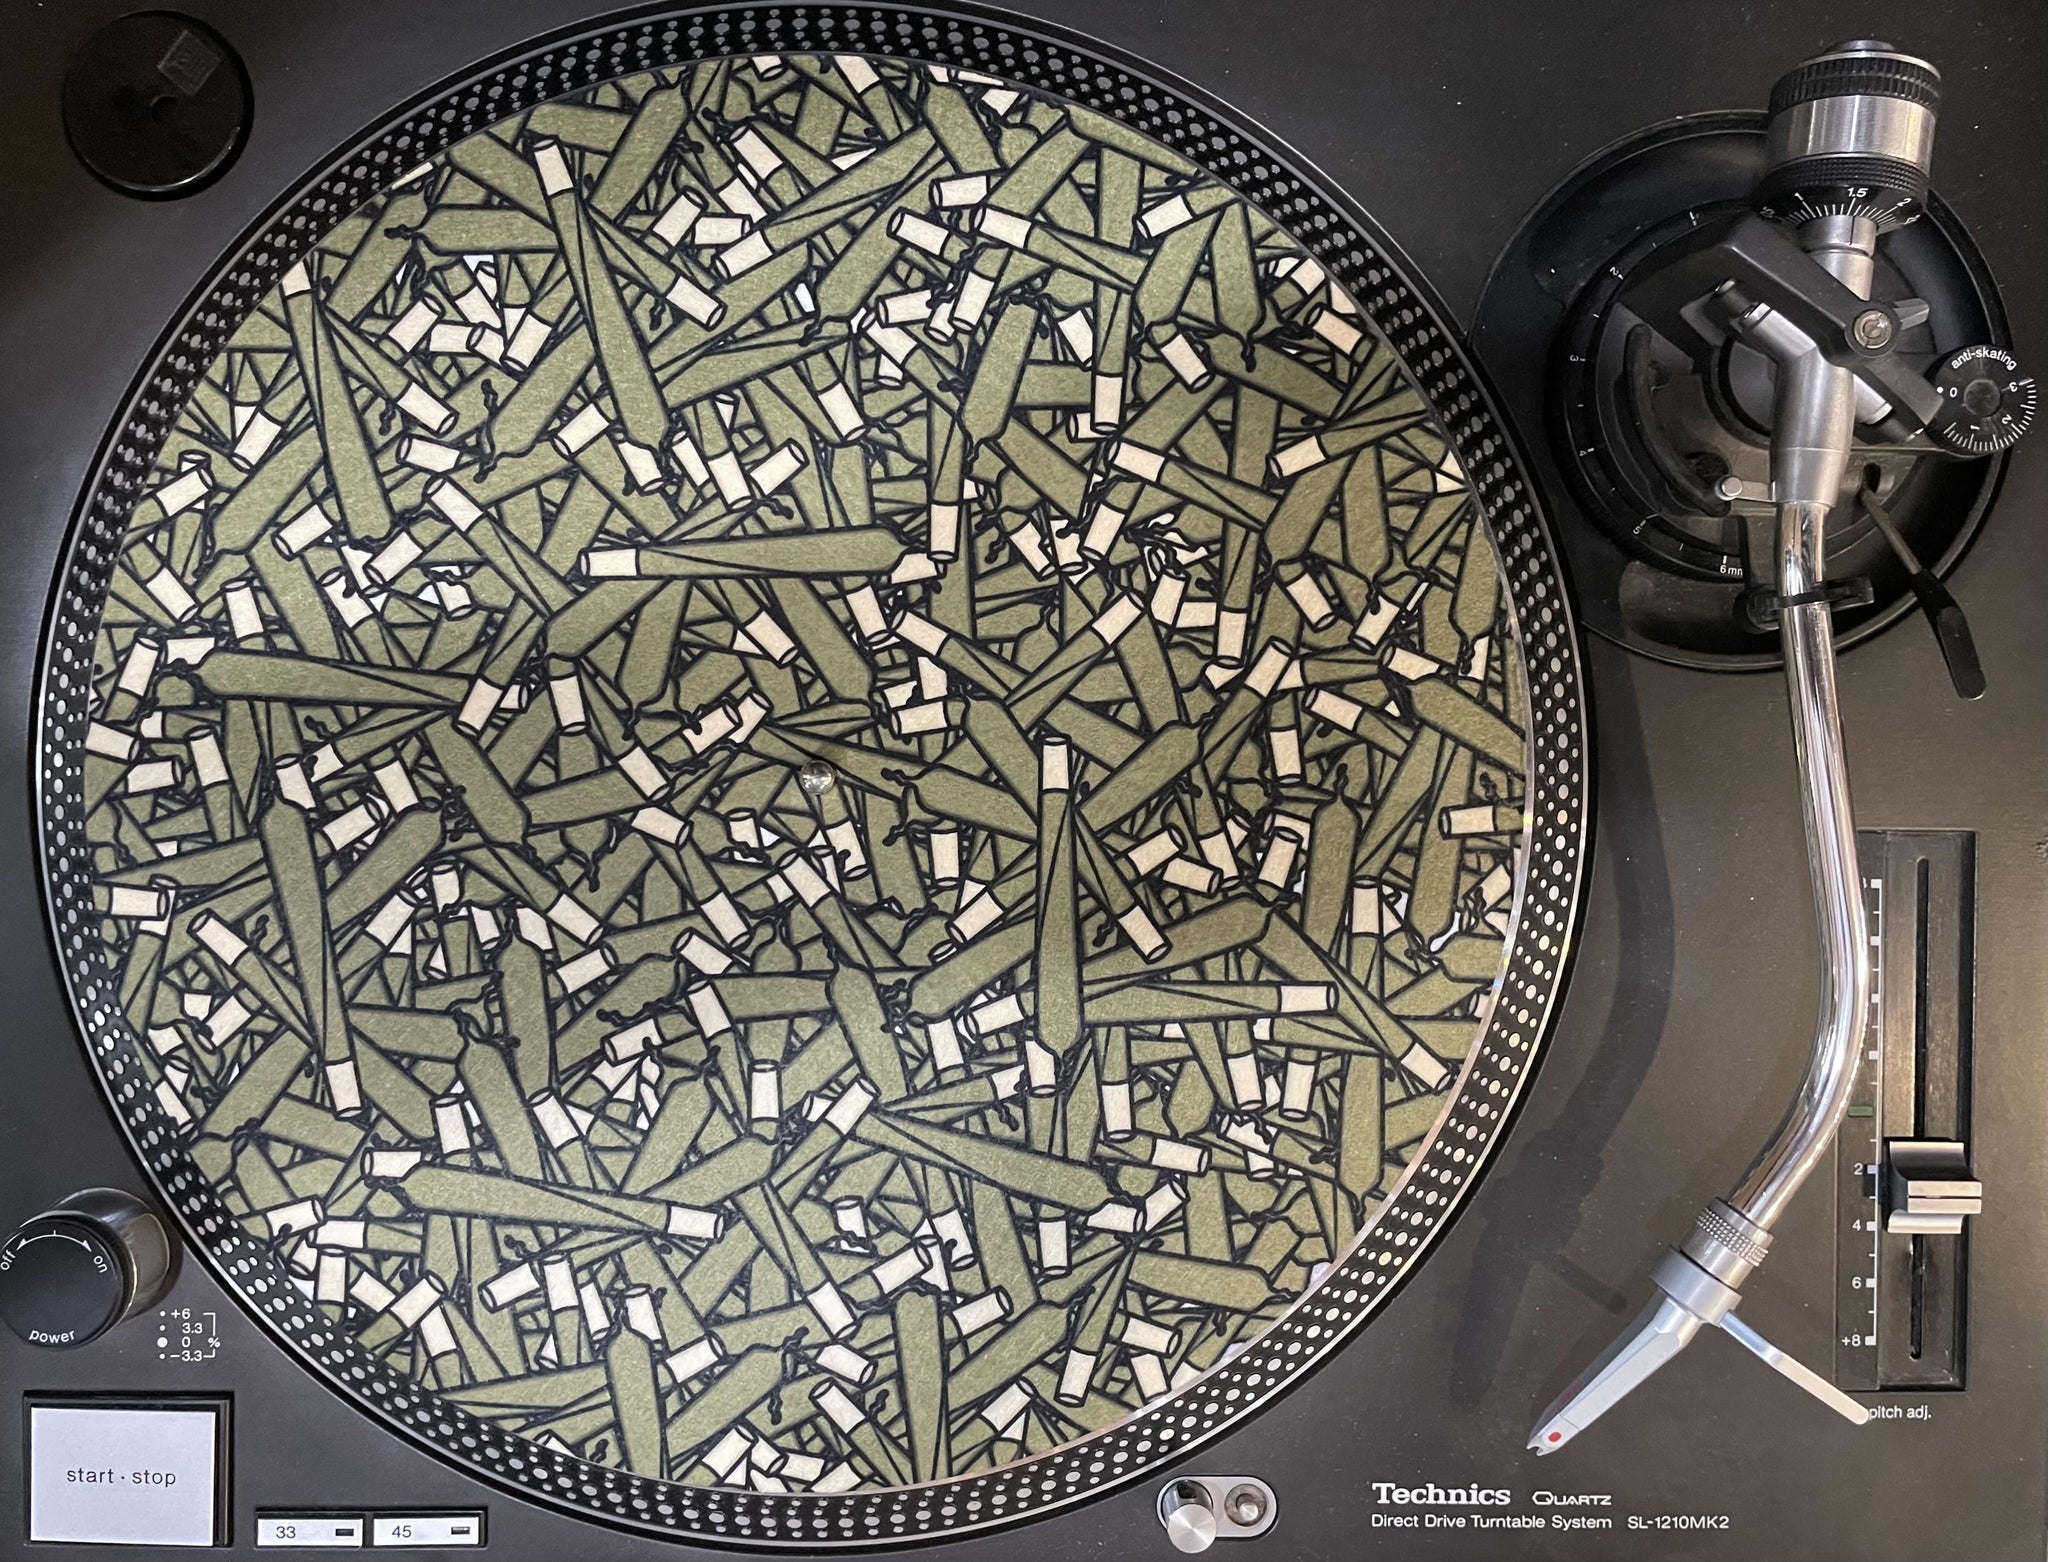 Limited Edition Vinyl Record Slipmat - Its The Joint - Slip Mat